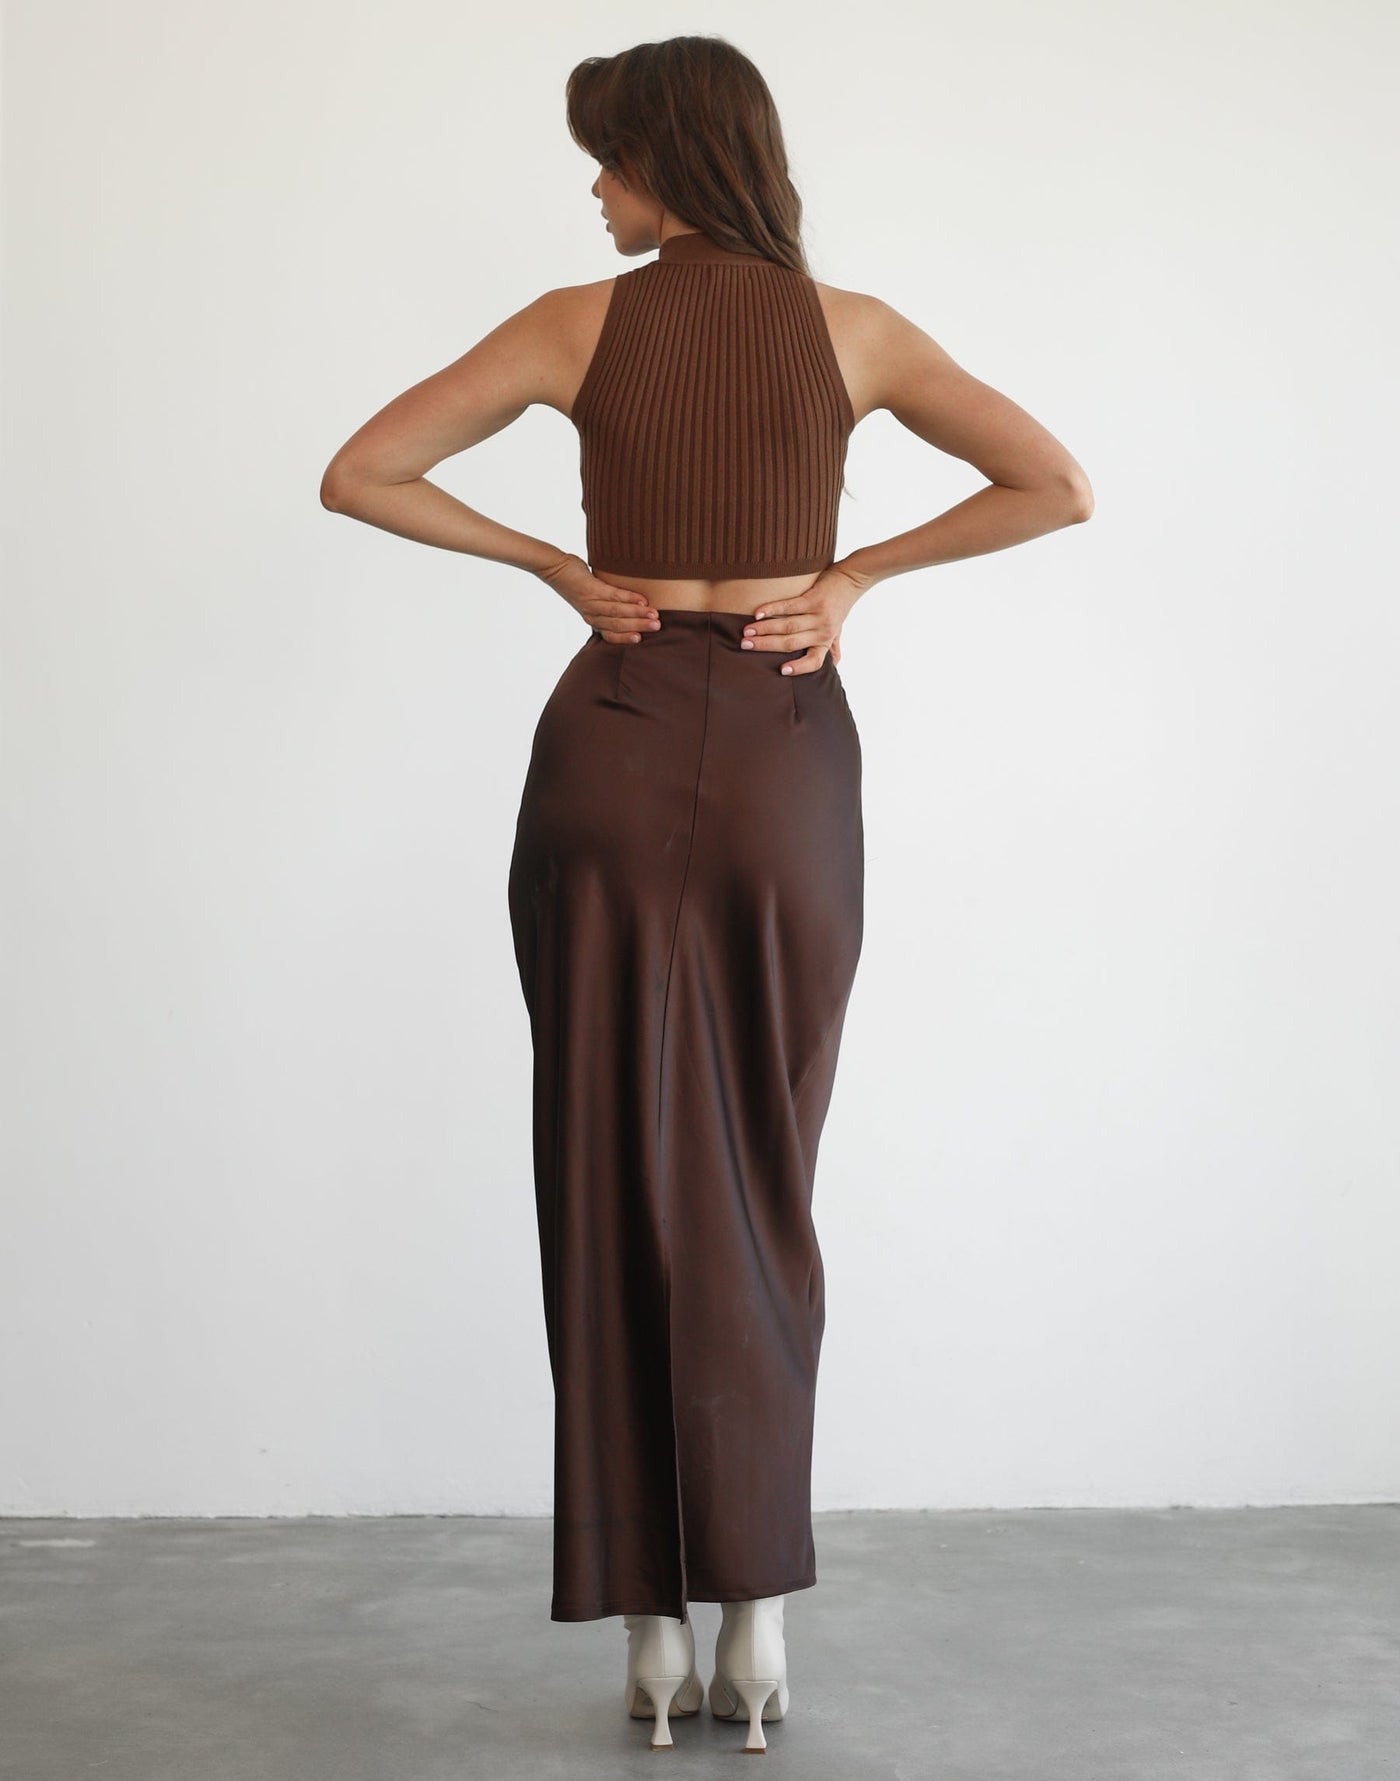 Cassie Tank Top (Brown) - Brown Ribbed Top - Women's Top - Charcoal Clothing